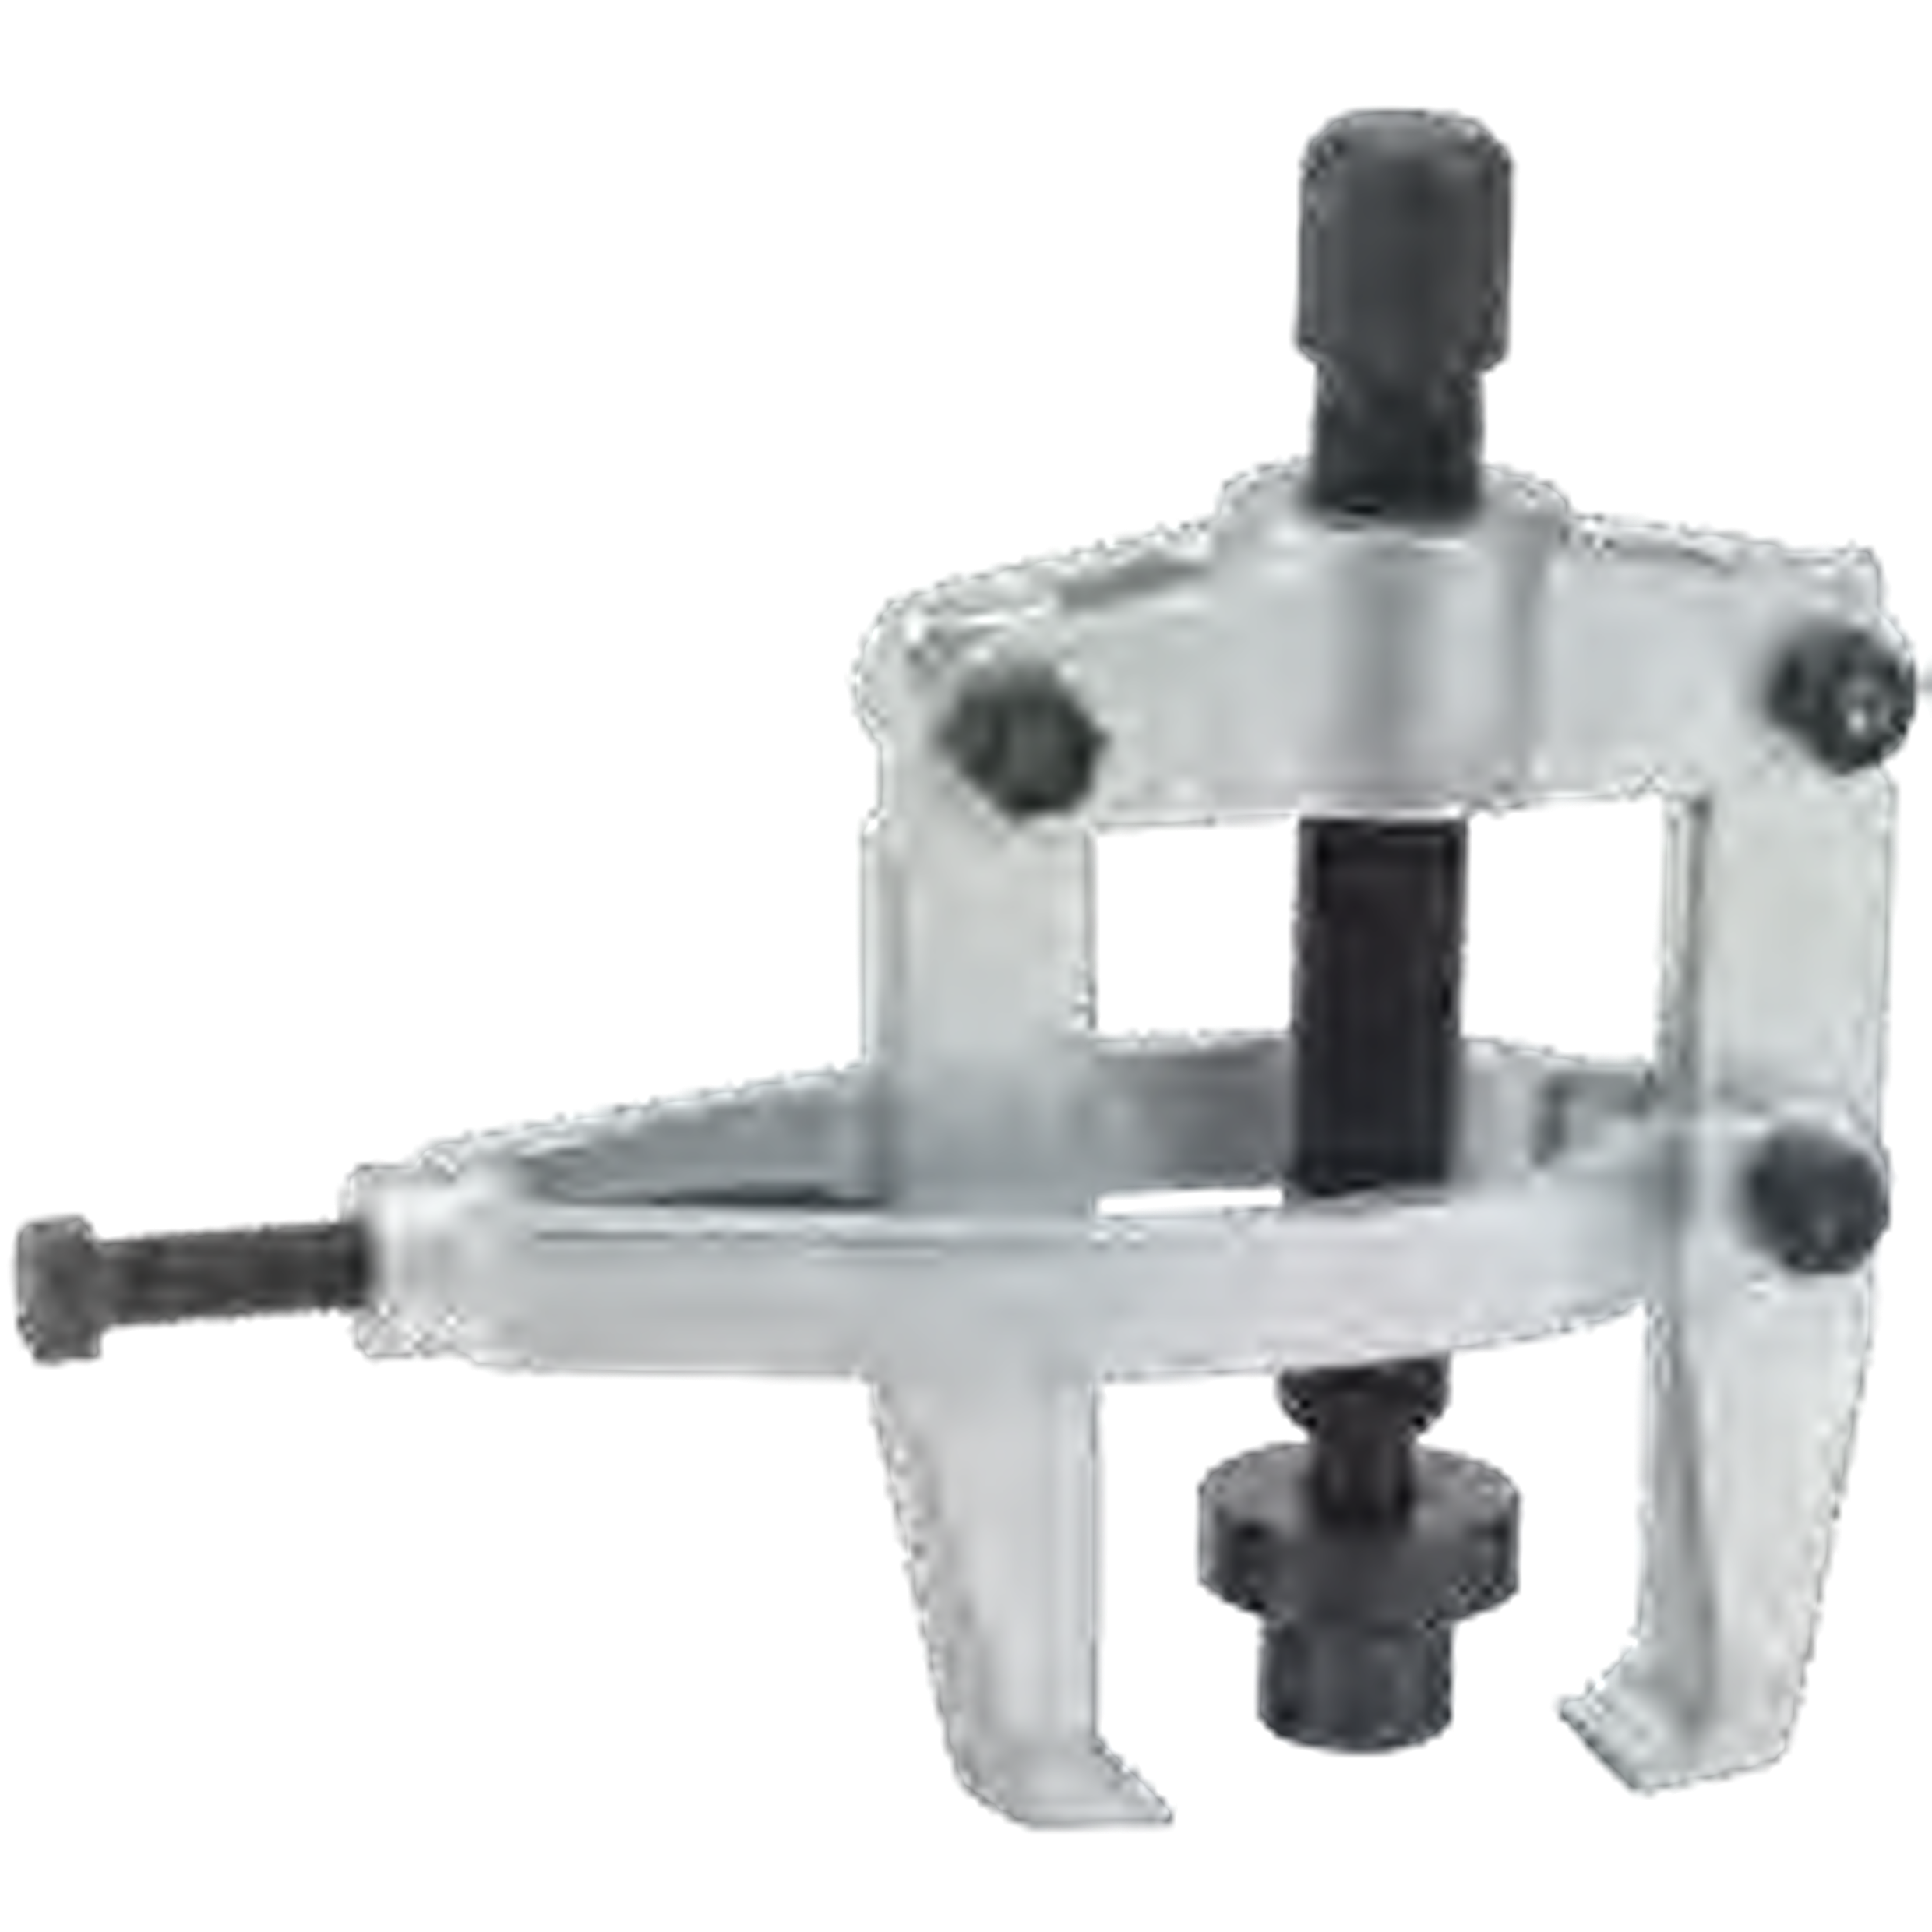 NEXUS 340 Universal-Puller With Side-Clamp, 2-Arms - Premium Mechanical Pullers from NEXUS - Shop now at Yew Aik.